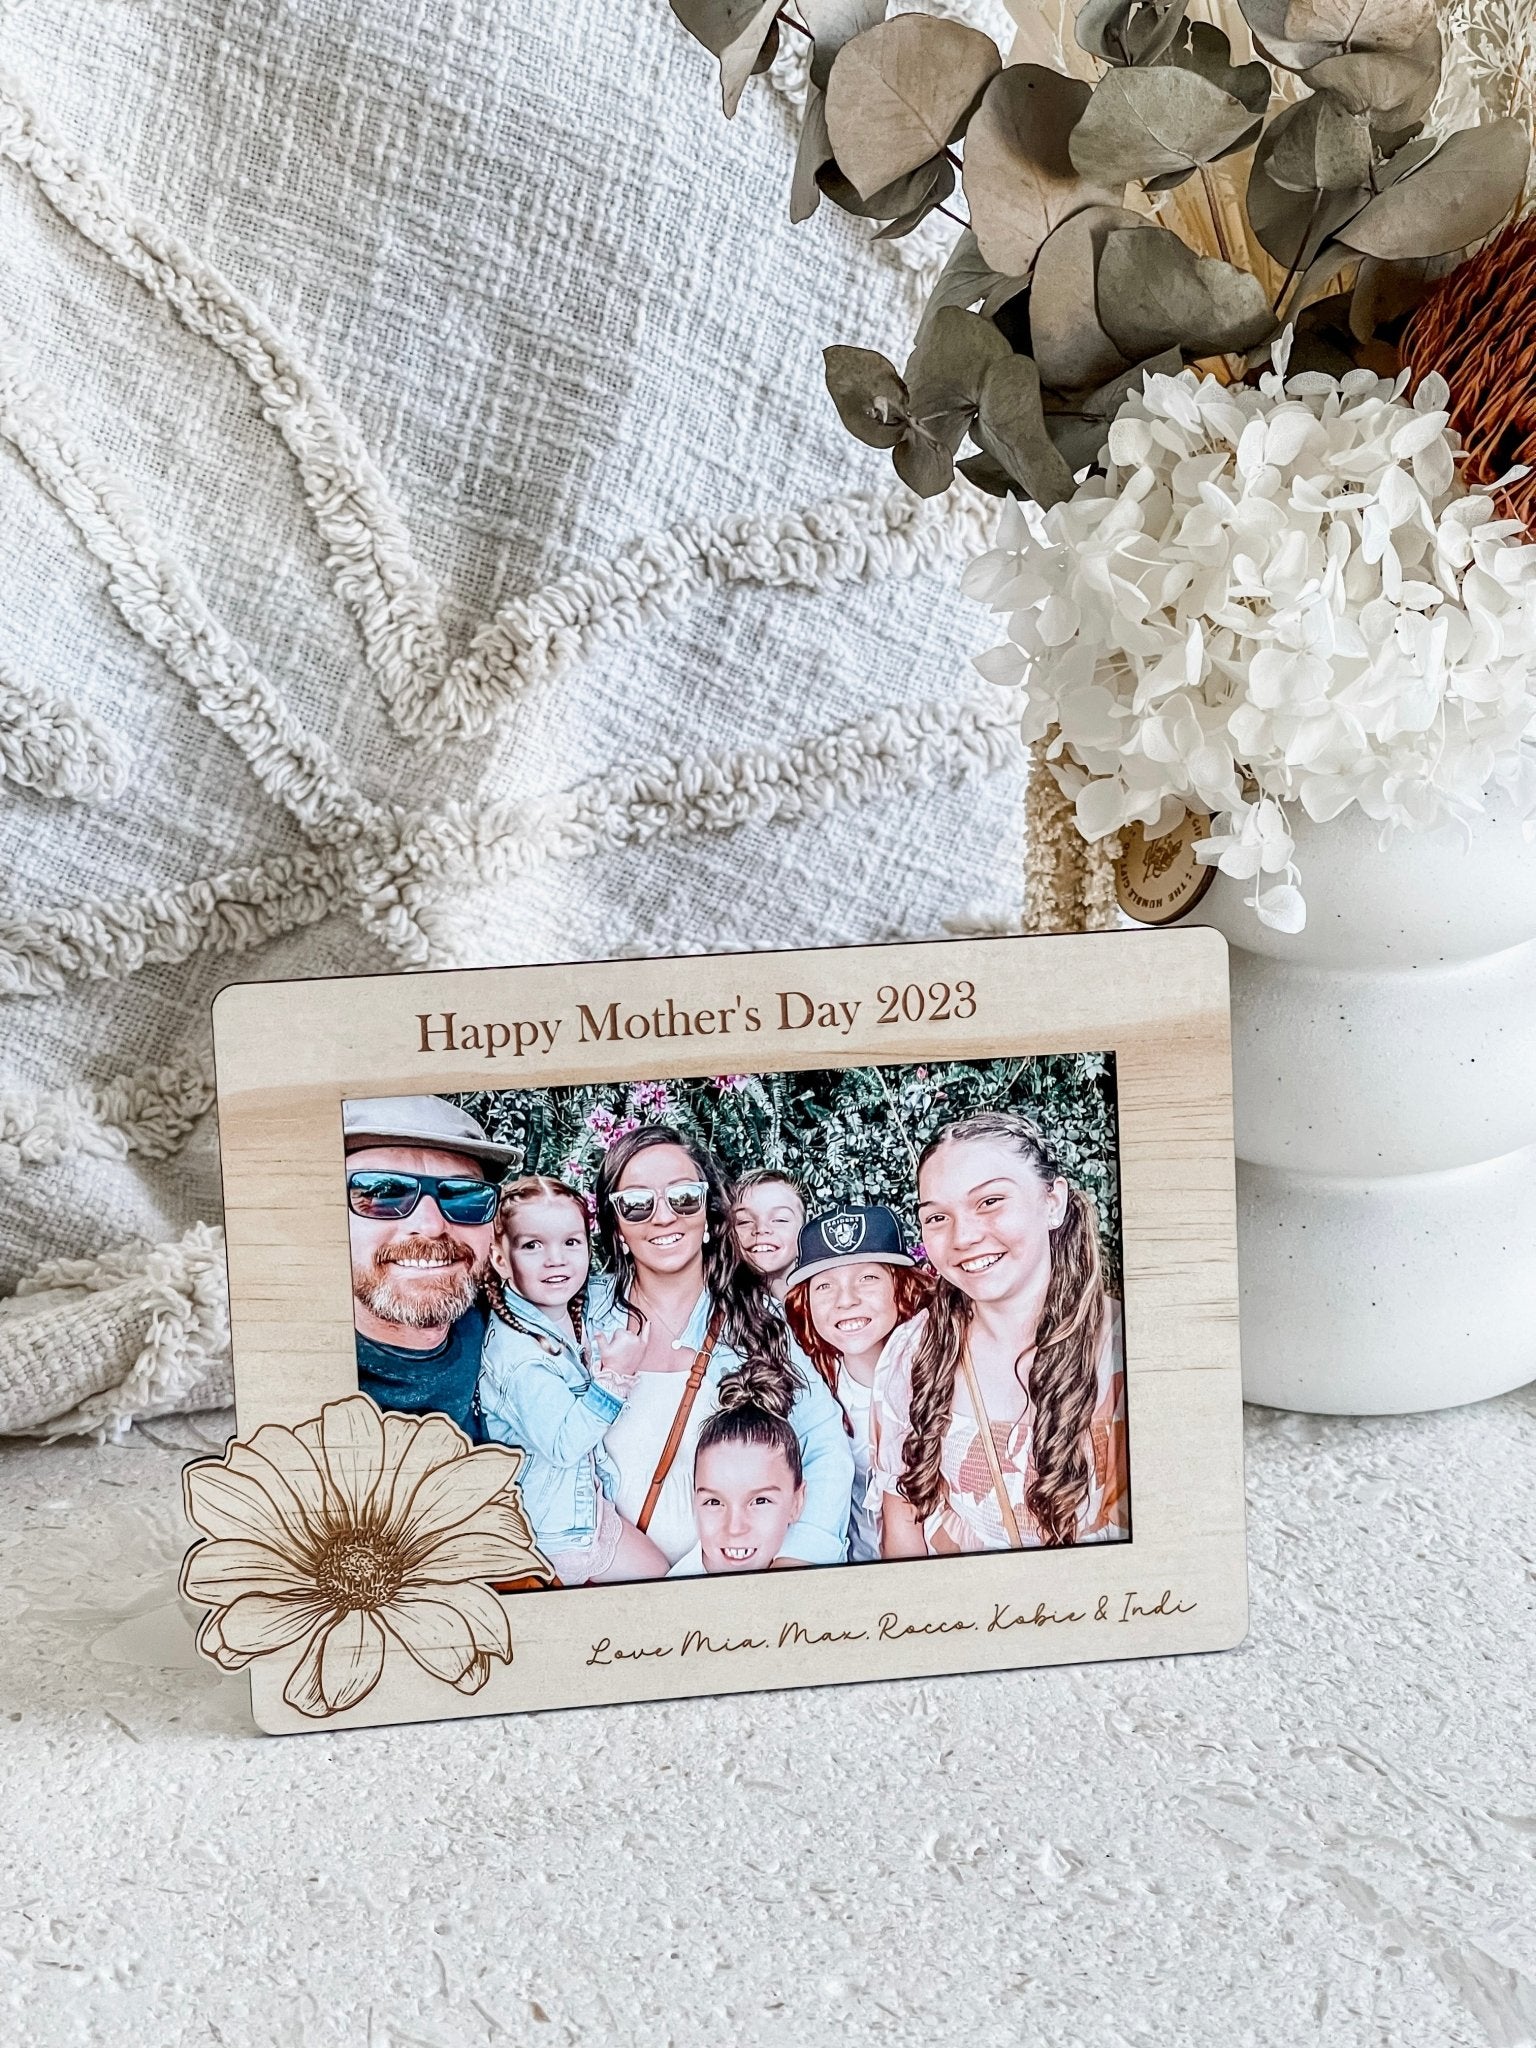 Bloom Picture Frame - The Humble Gift Co.